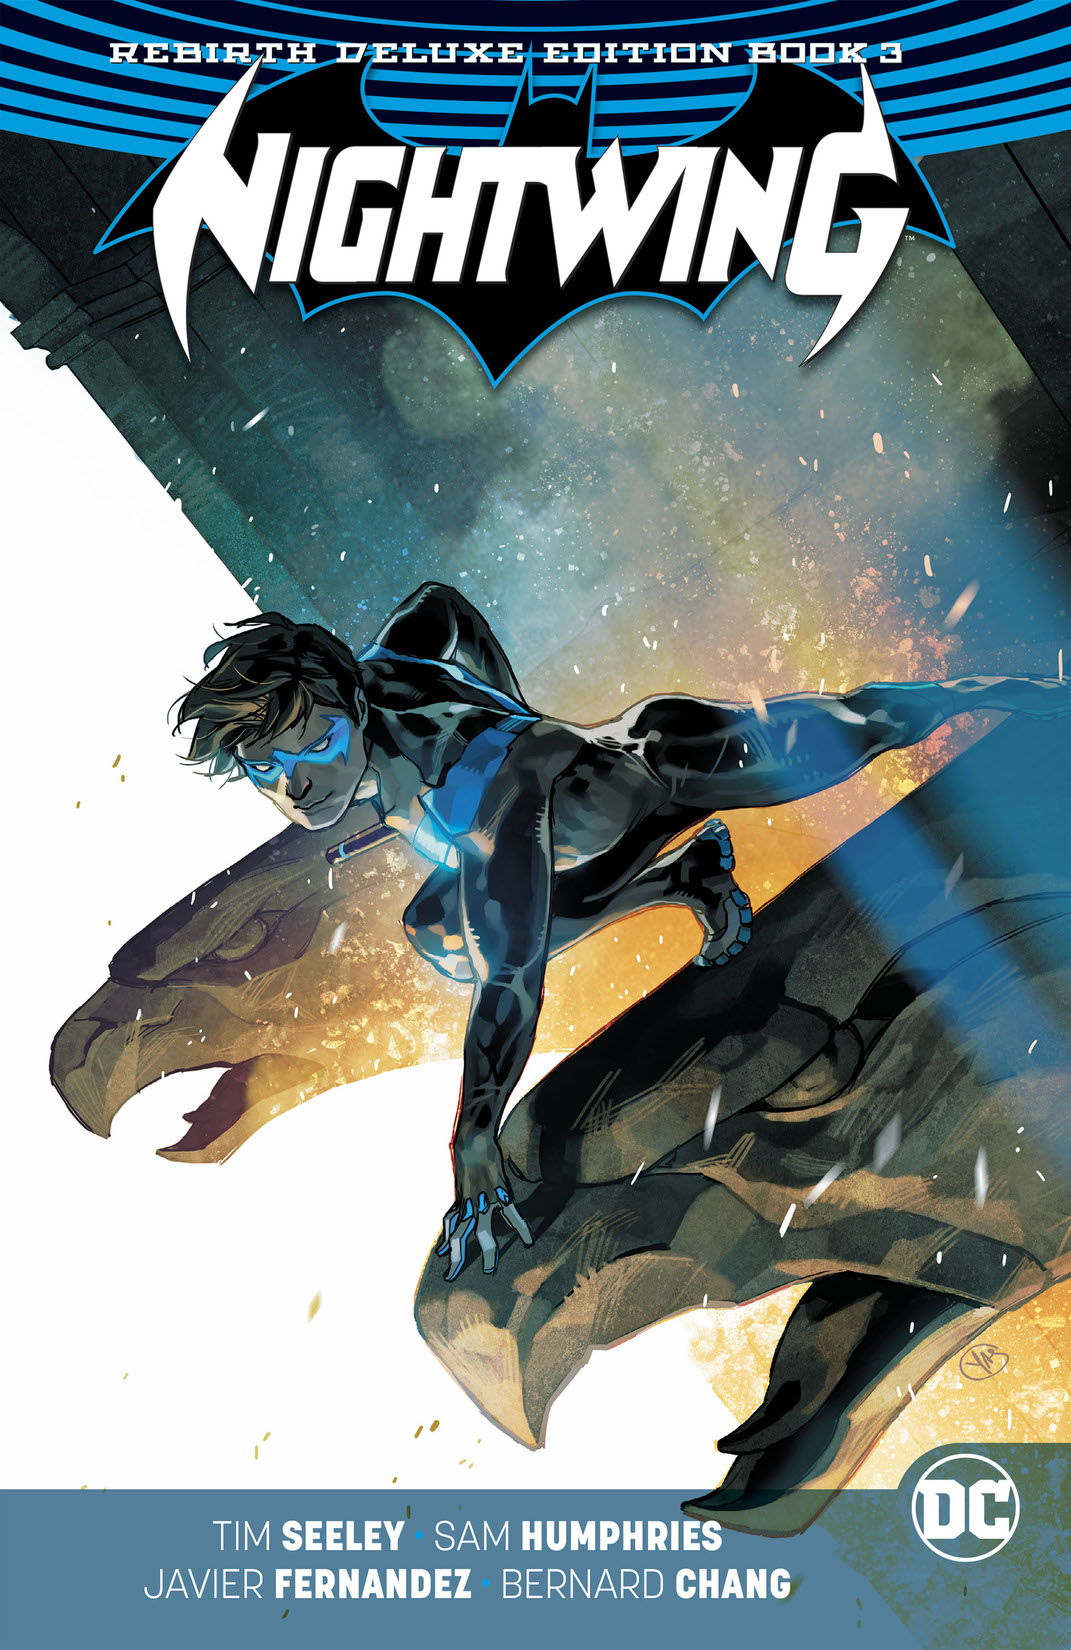 Nightwing: The Rebirth Deluxe Edition Book 3 preview images